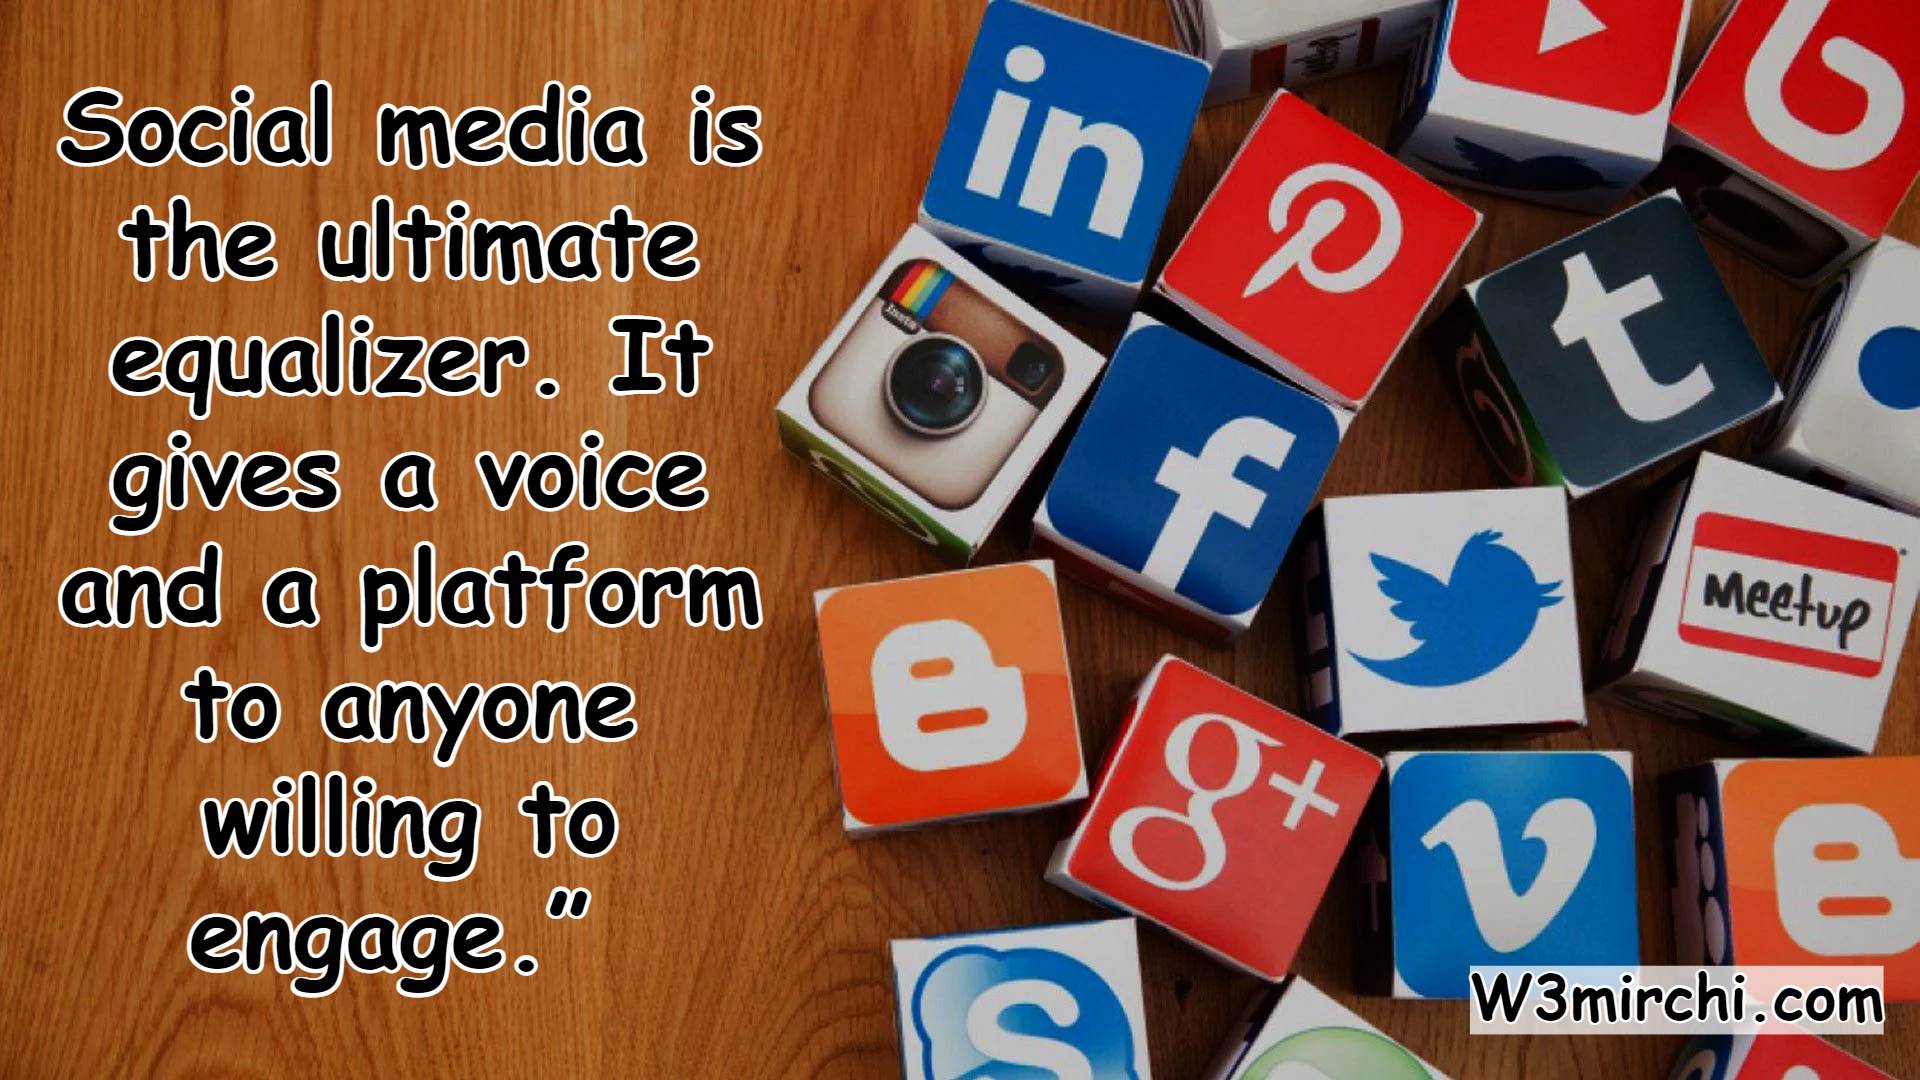 “Social media is the ultimate equalizer.